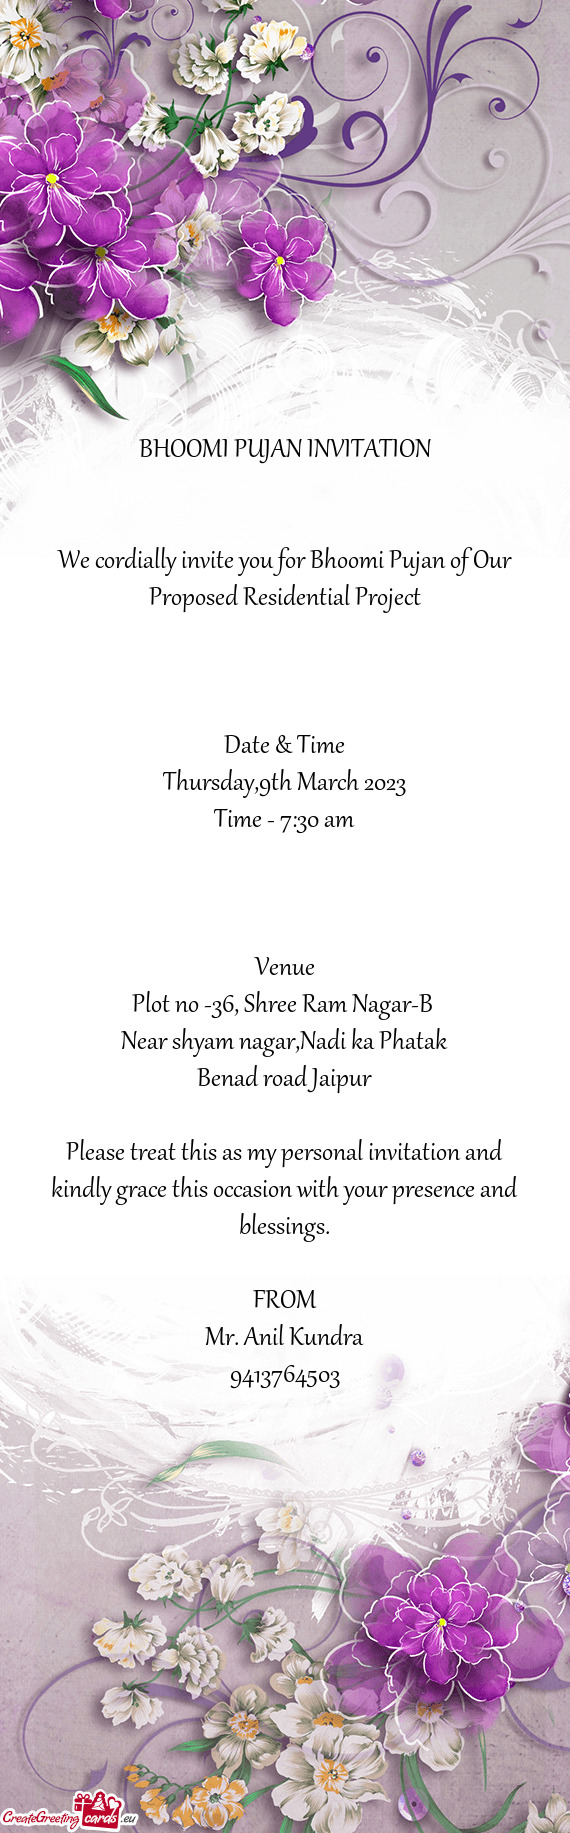 We cordially invite you for Bhoomi Pujan of Our Proposed Residential Project